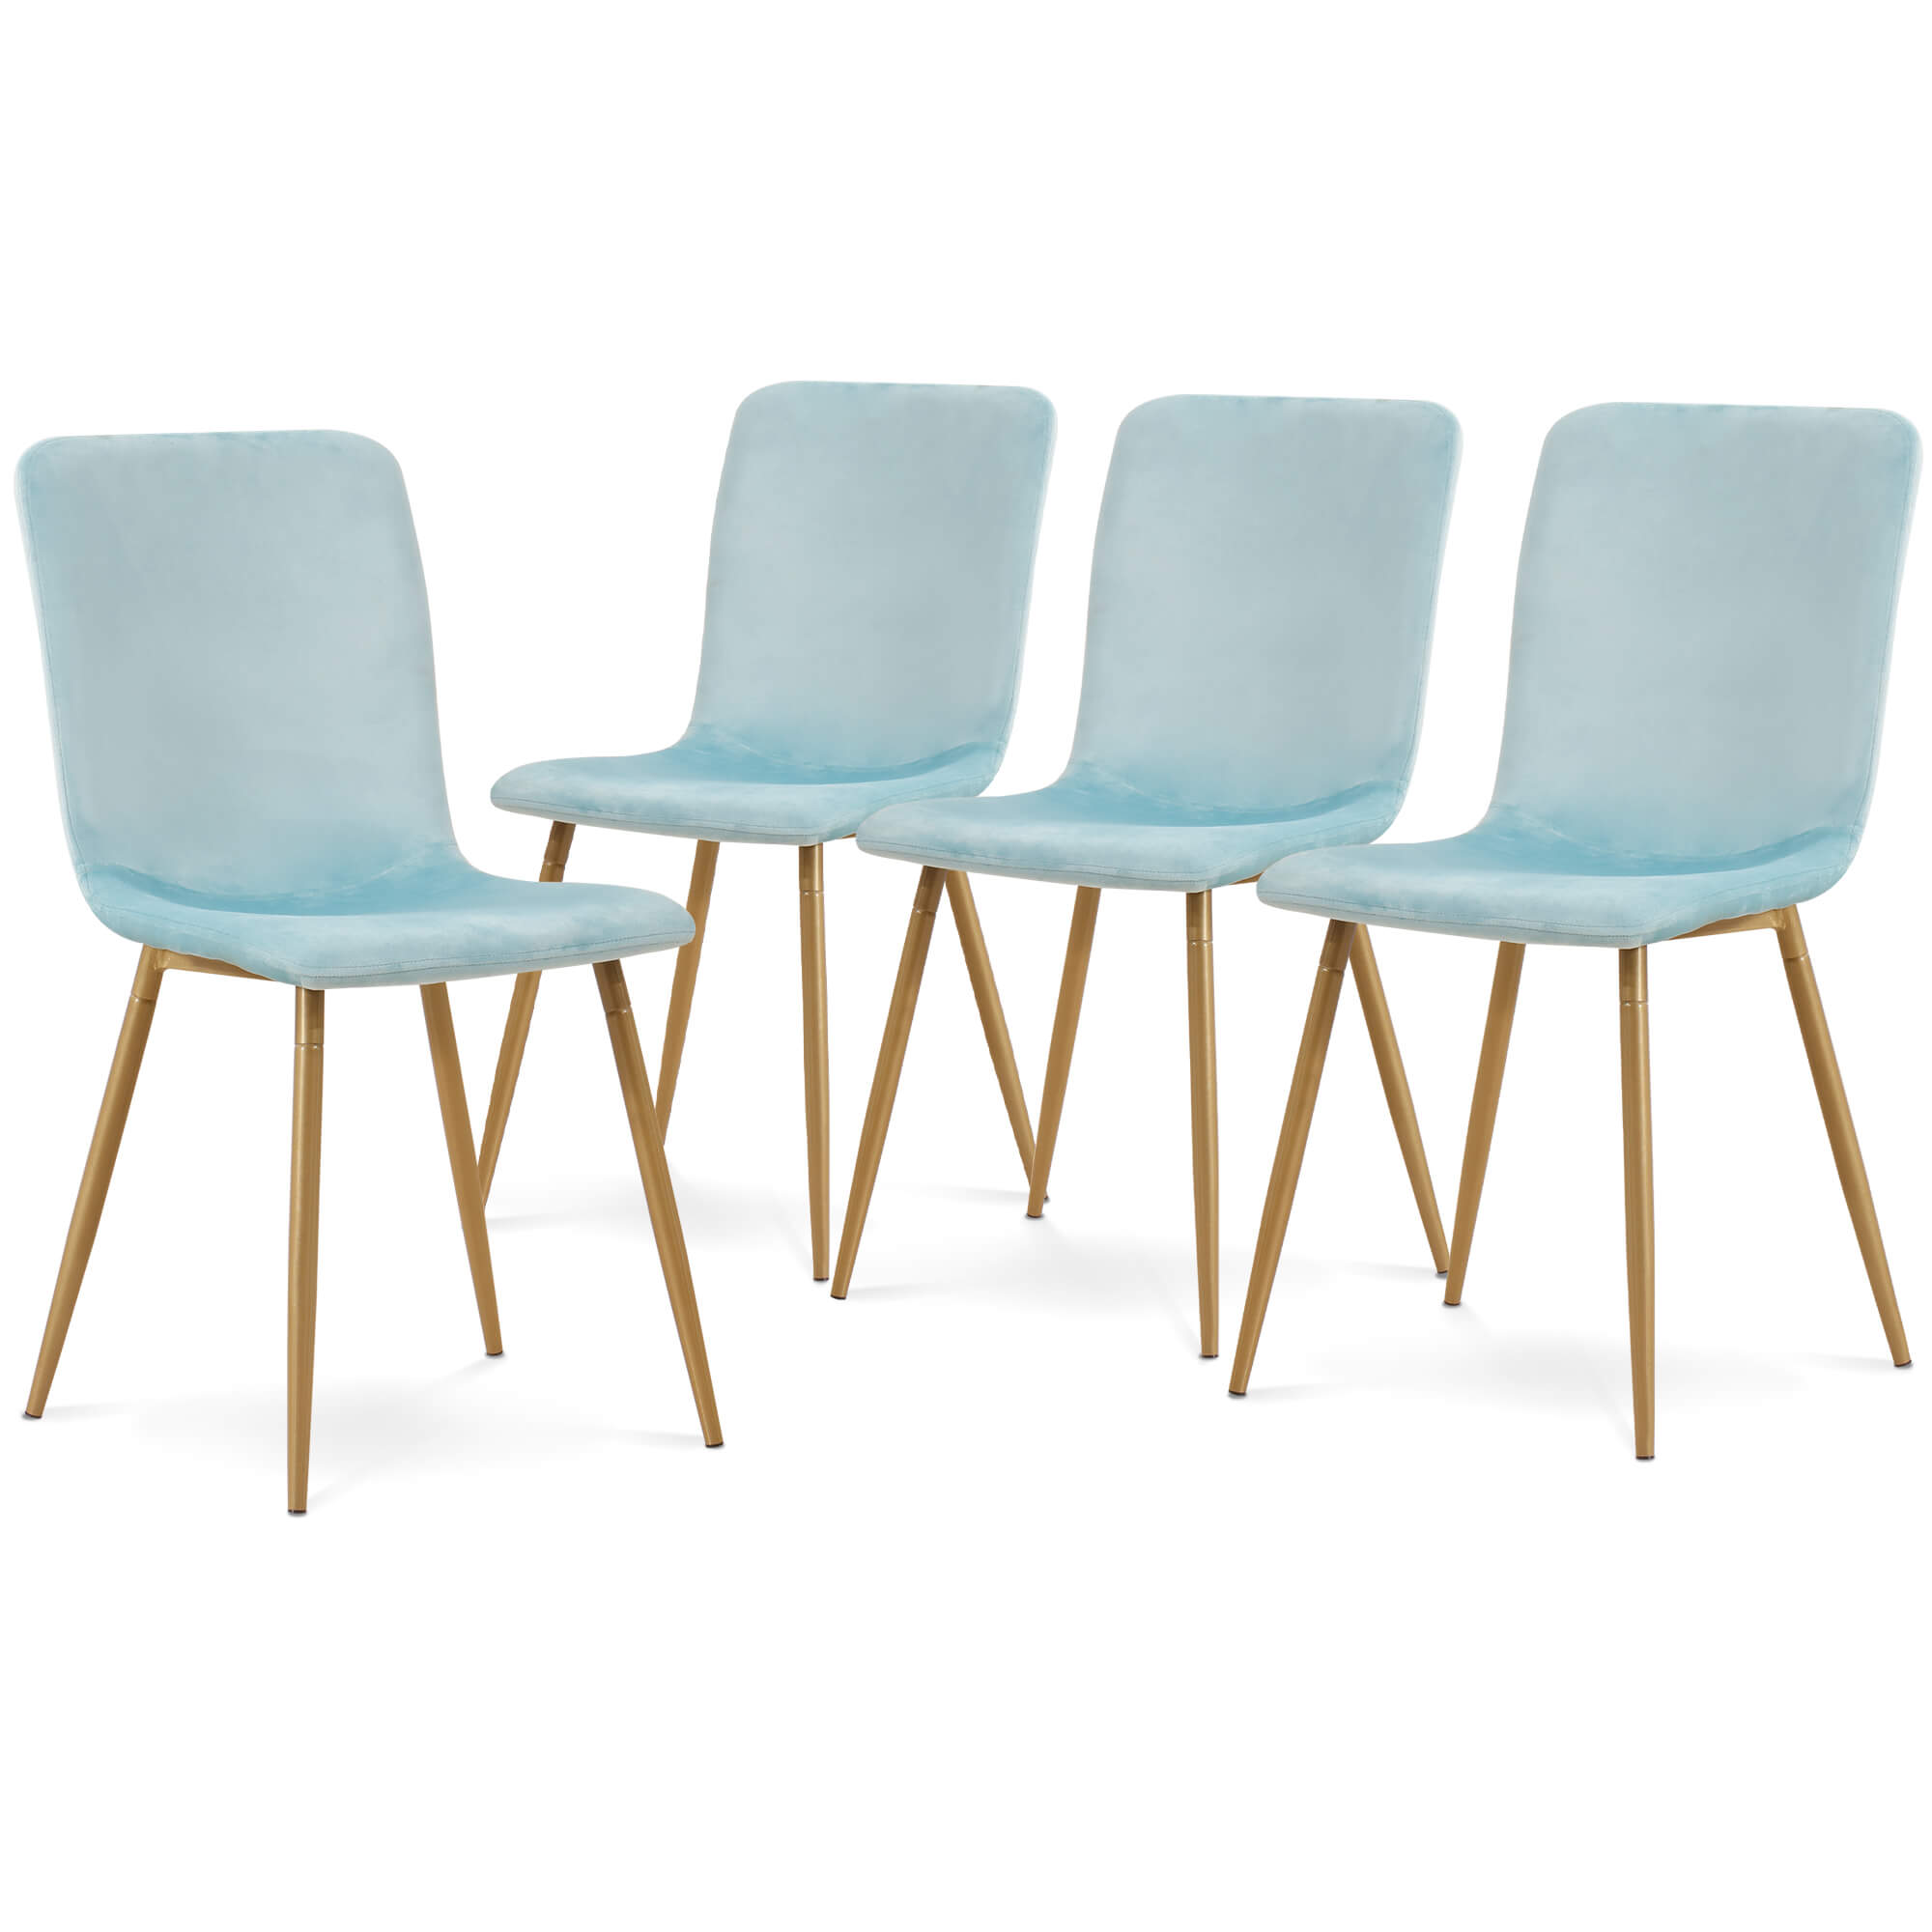 Ivinta Accent Armless Chairs Set of 4 Velvet Dining Chairs Mid Century - Ivinta